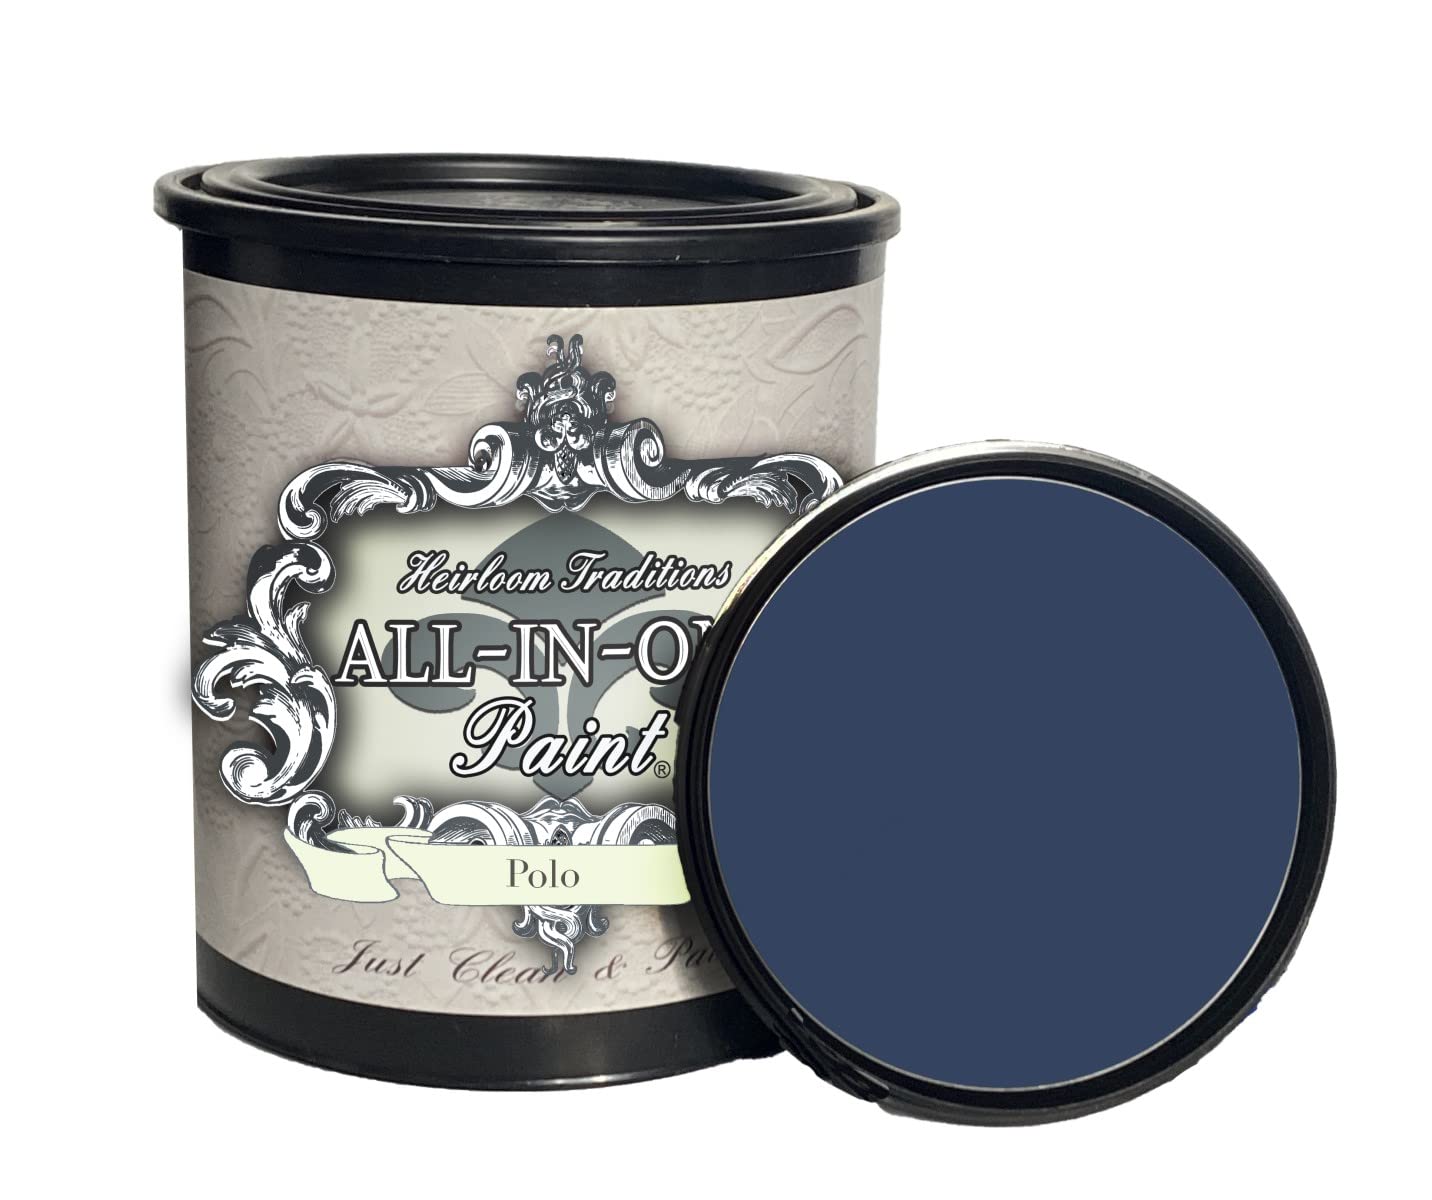 Heirloom Traditions Paint ALL-IN-ONE Paint by Heirloom Traditions